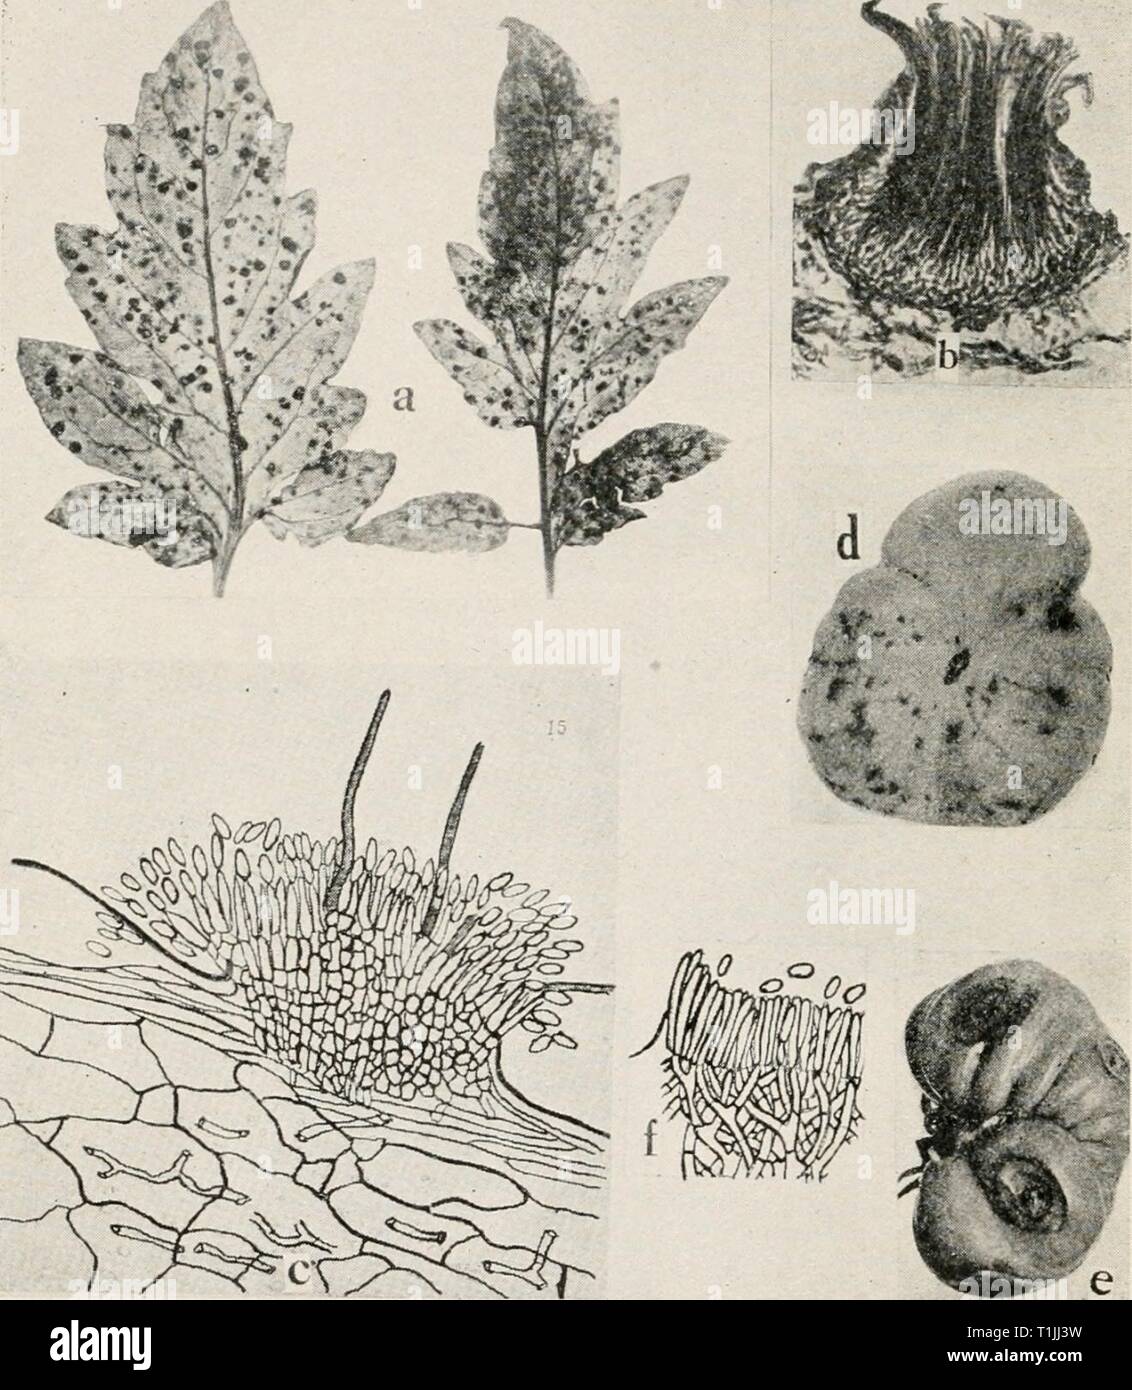 Diseases of truck crops and Diseases of truck crops and their control  diseasesoftruckc00taubuoft Year: [1918]  Fig. 66. TOxMato Diseases. a. Septoria leaf spot, b. section through a pycnidium of Septoria lycopersici (after Levin), c. section through acervulus of Colletolrichum phomoides (after Venus Pool), d. anil e. Melanconium rot, /. section through an acervulus of the Melan- conium fungus {d. to f. after Tisdale). Stock Photo